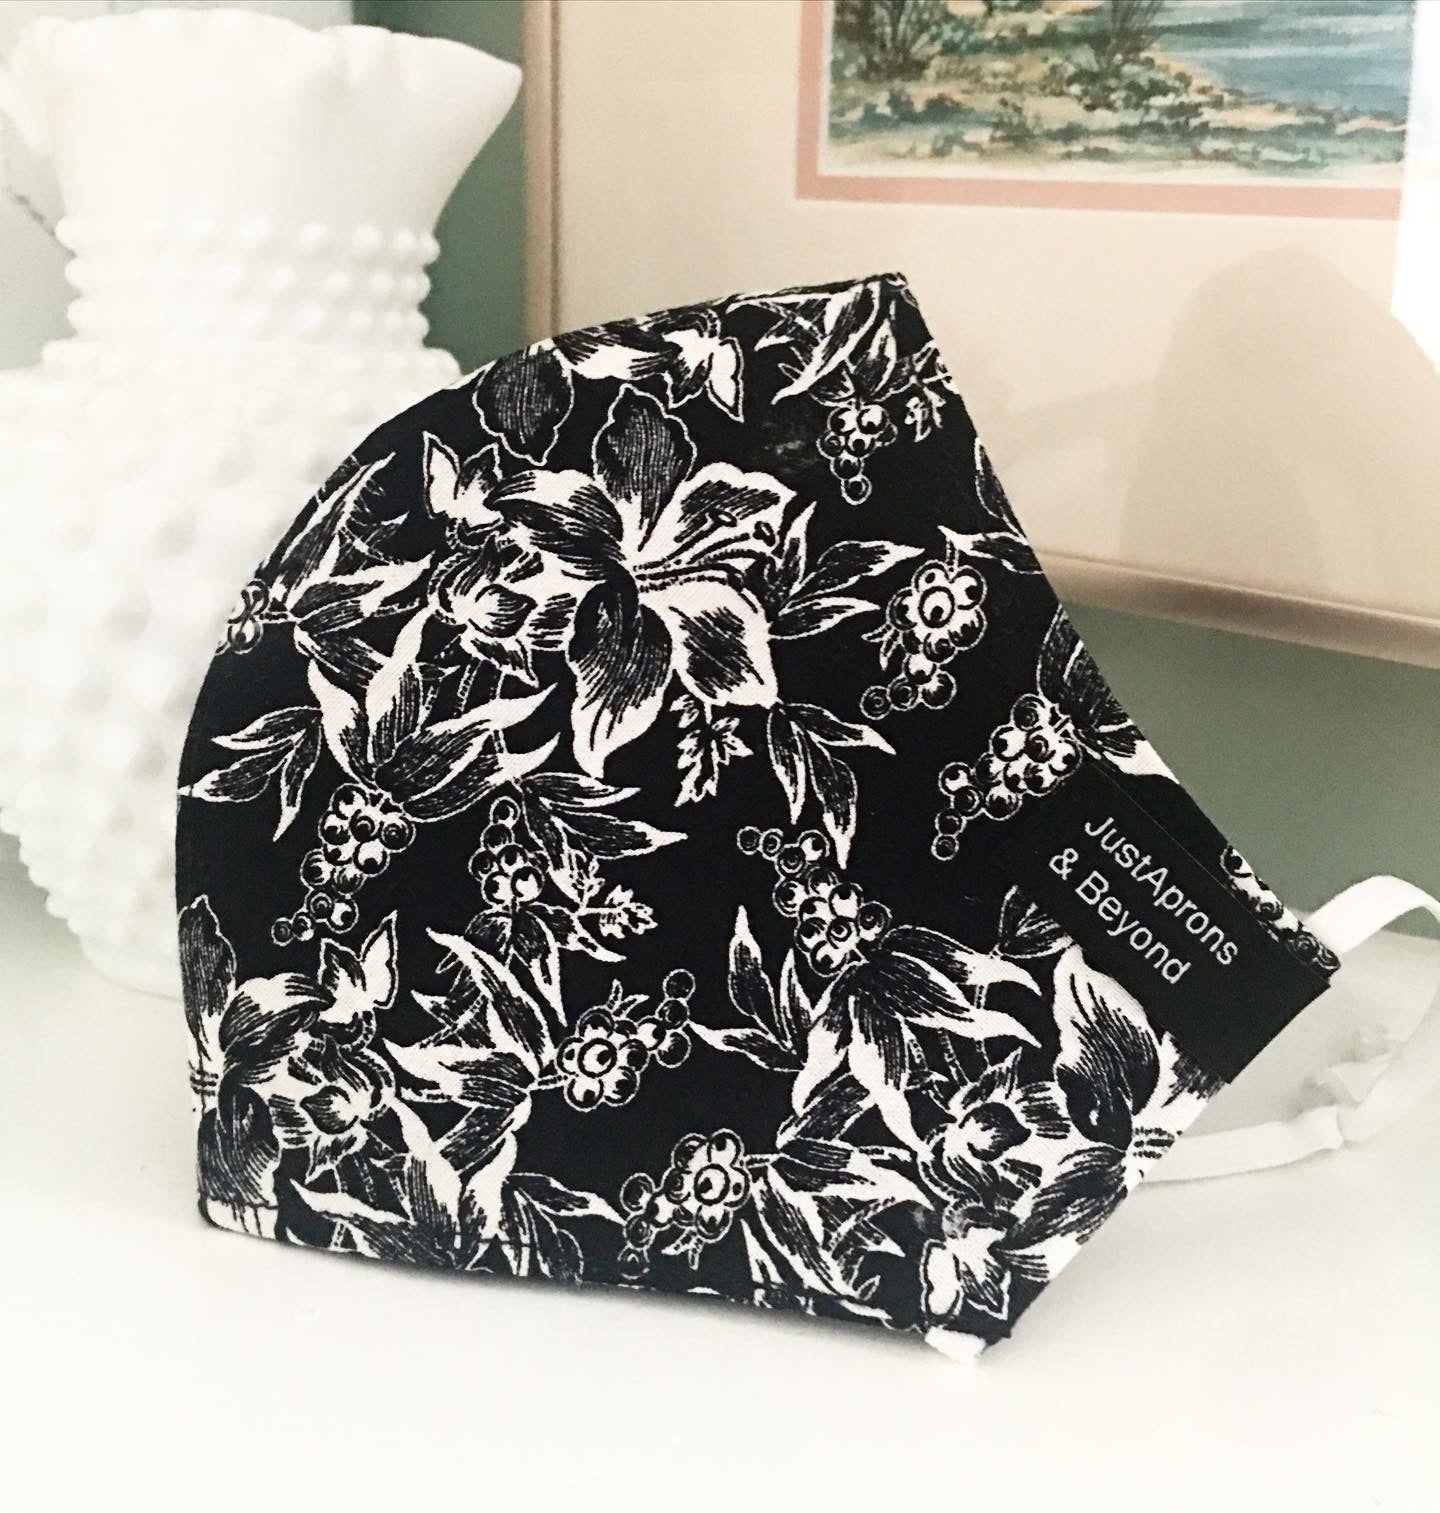 Back to Black Floral Collection